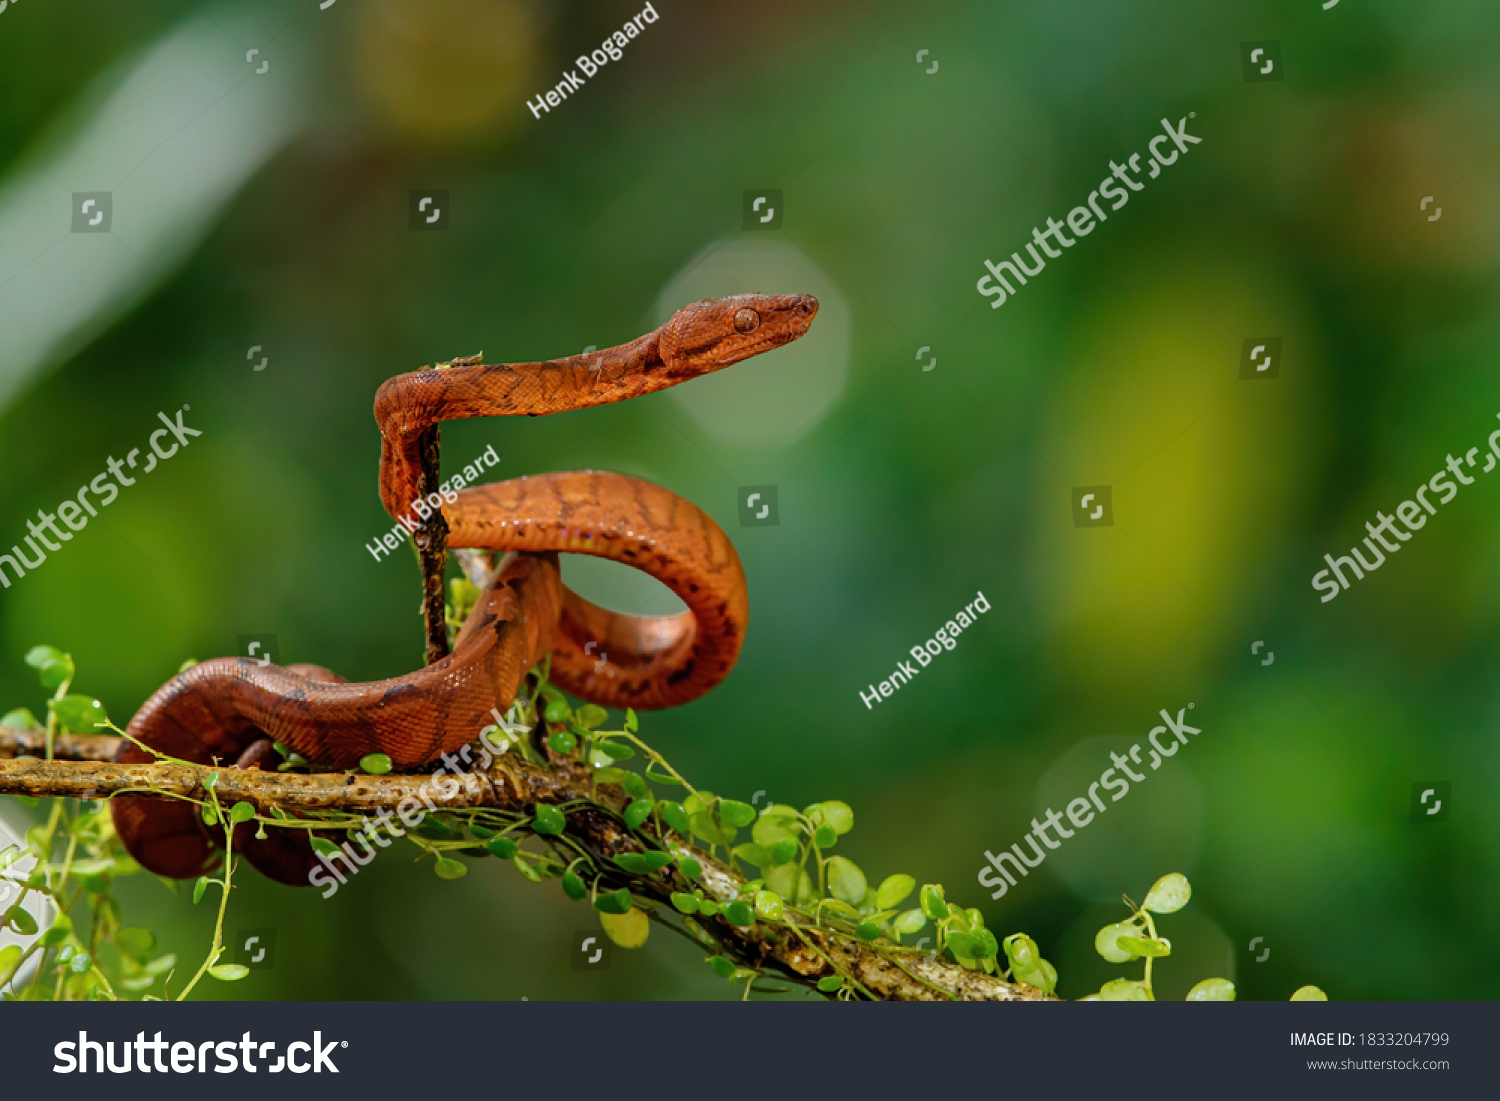 Central American Tree Boa, Corallus annulatus, also known as common tree boa, Trinidad tree boa or tee boa hanging on a branch in the forest in Costa Rica #1833204799